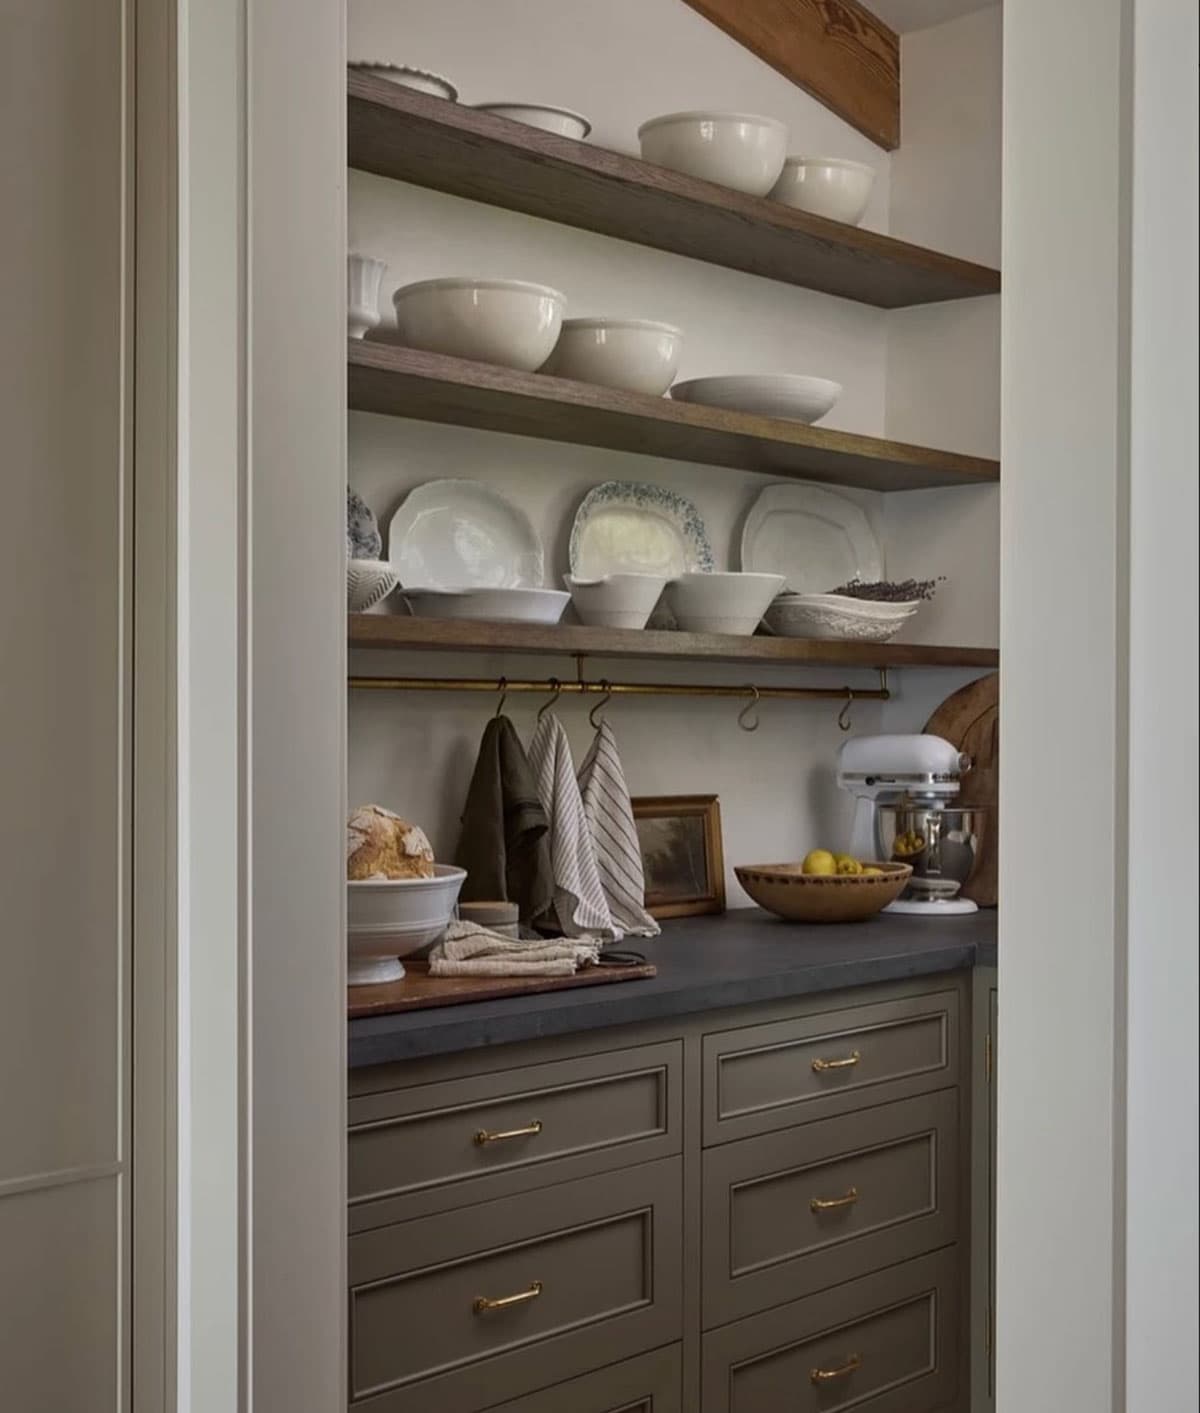 BOLD DESIGN OPPORTUNITY IN A BUTLER'S PANTRY